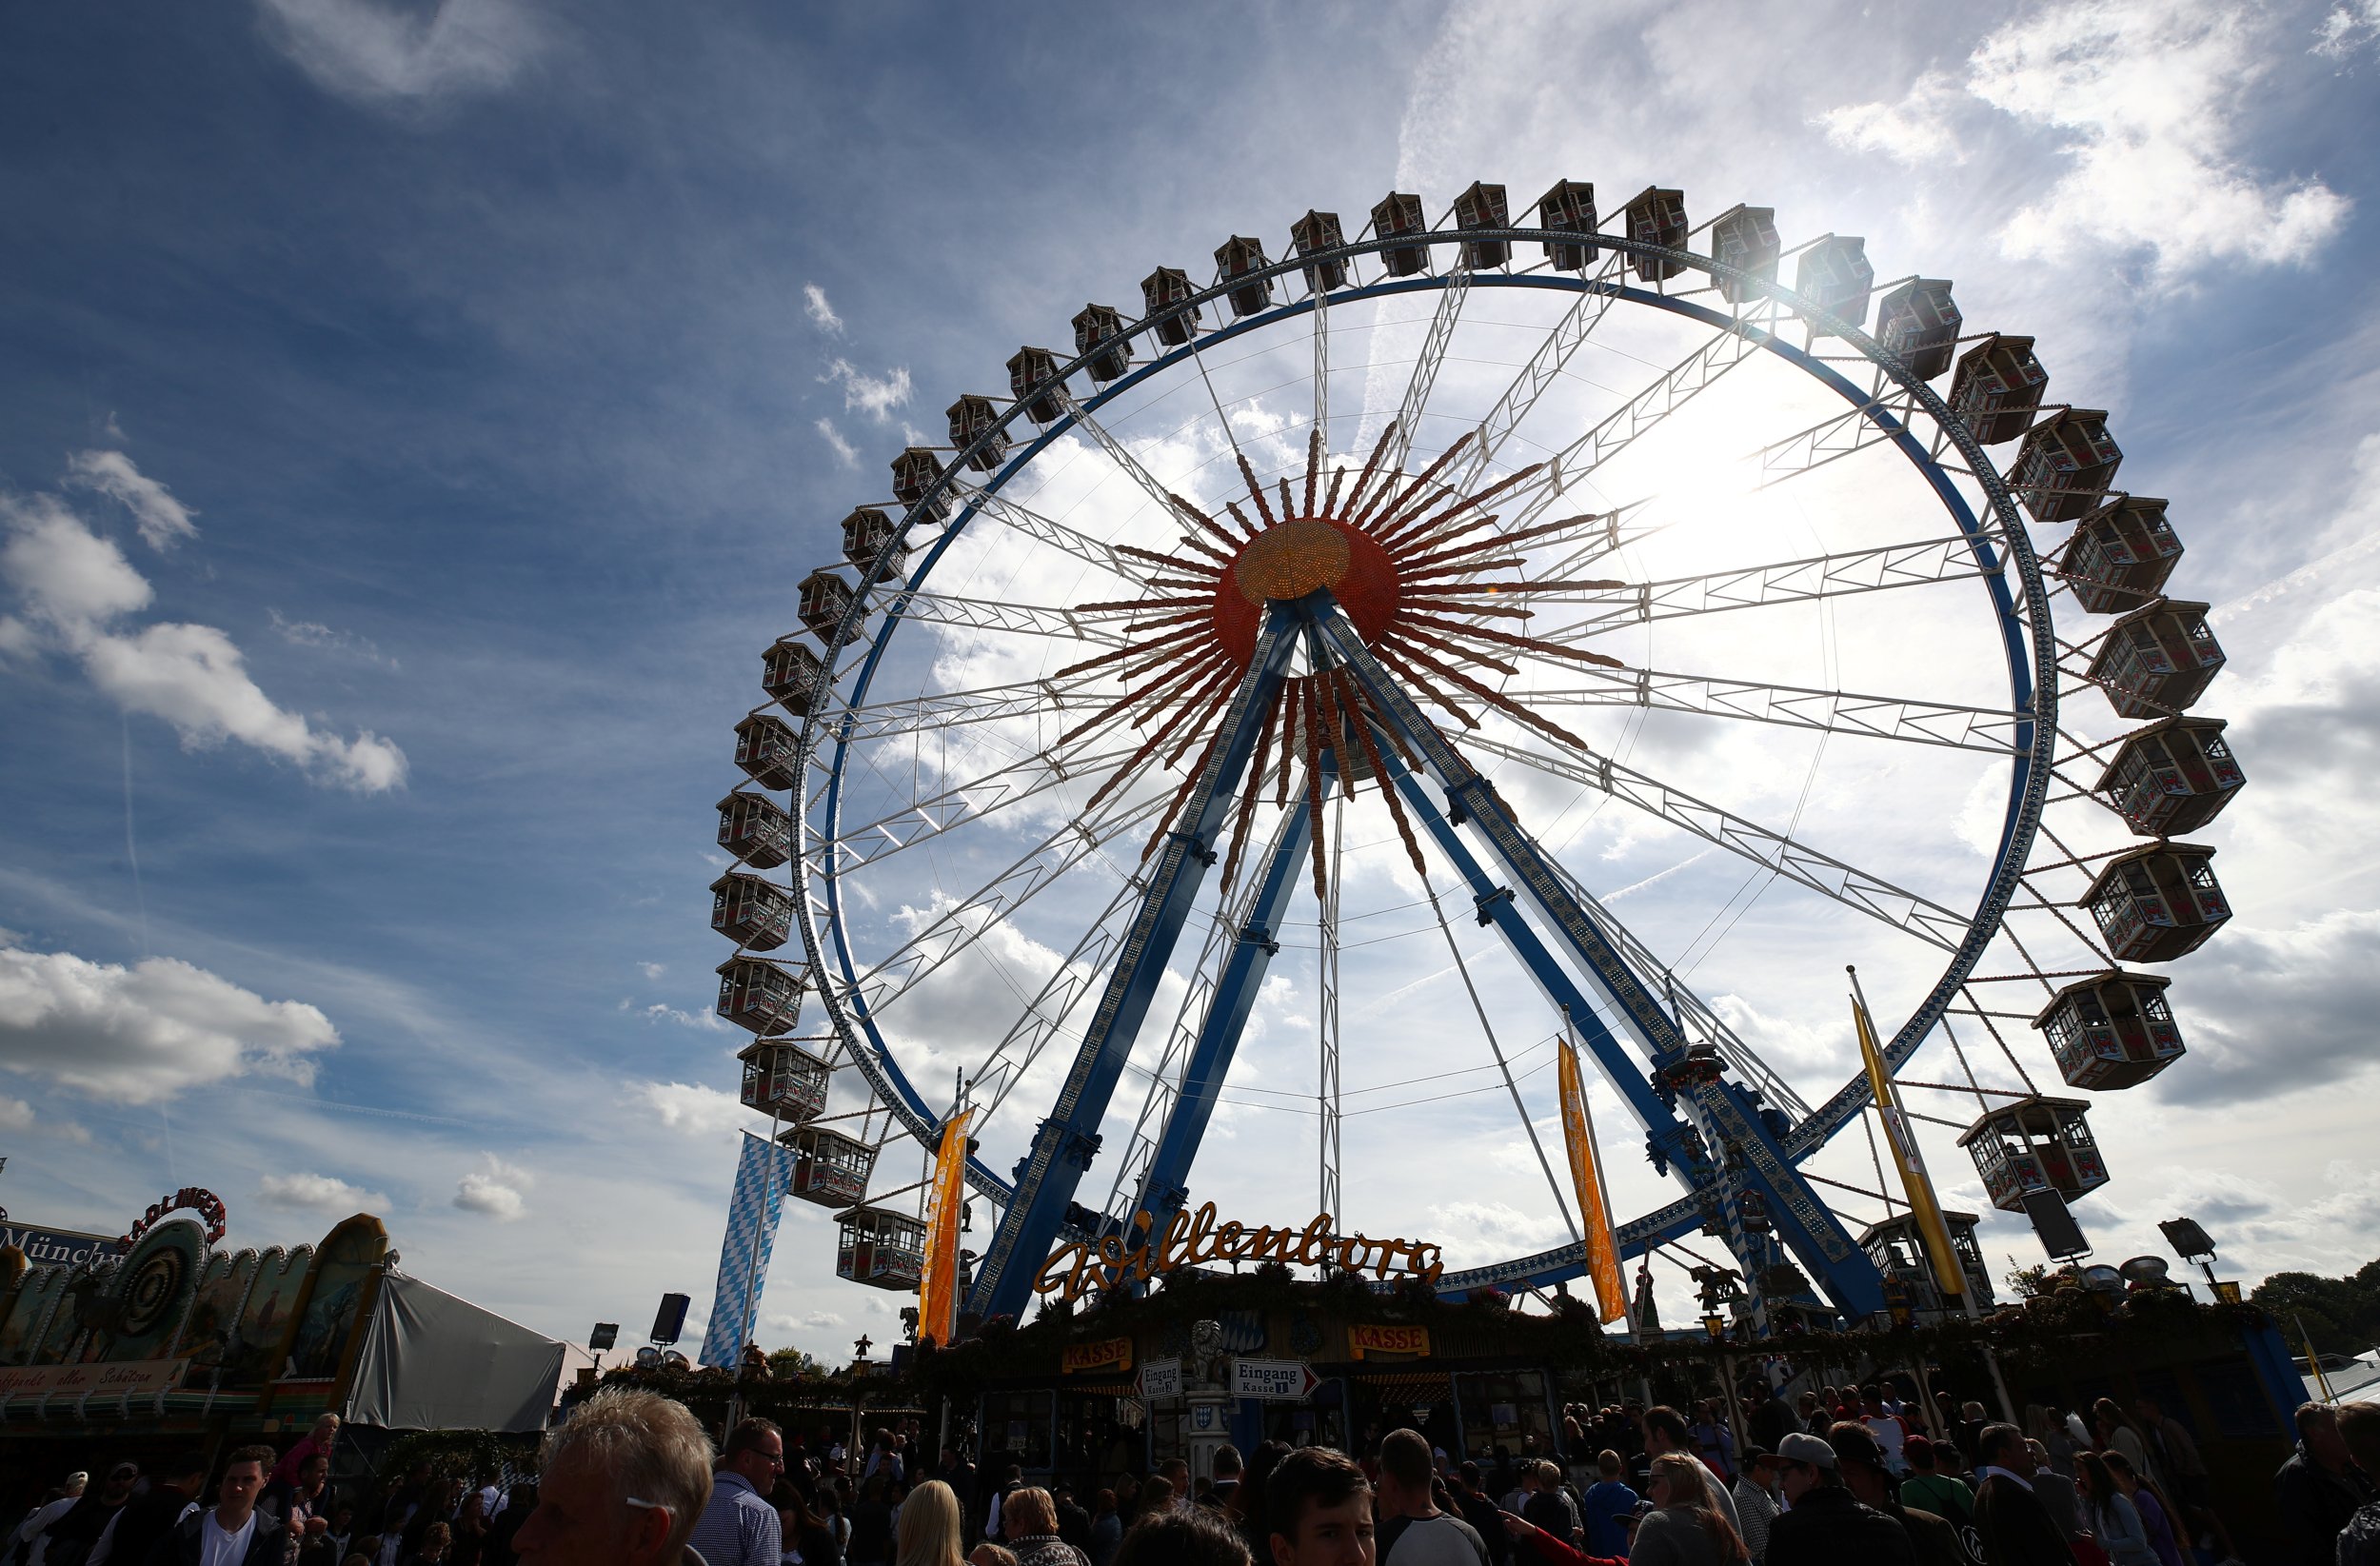 South Carolina Couple Held For Having Sex On Ferris Wheel At Myrtle Beach